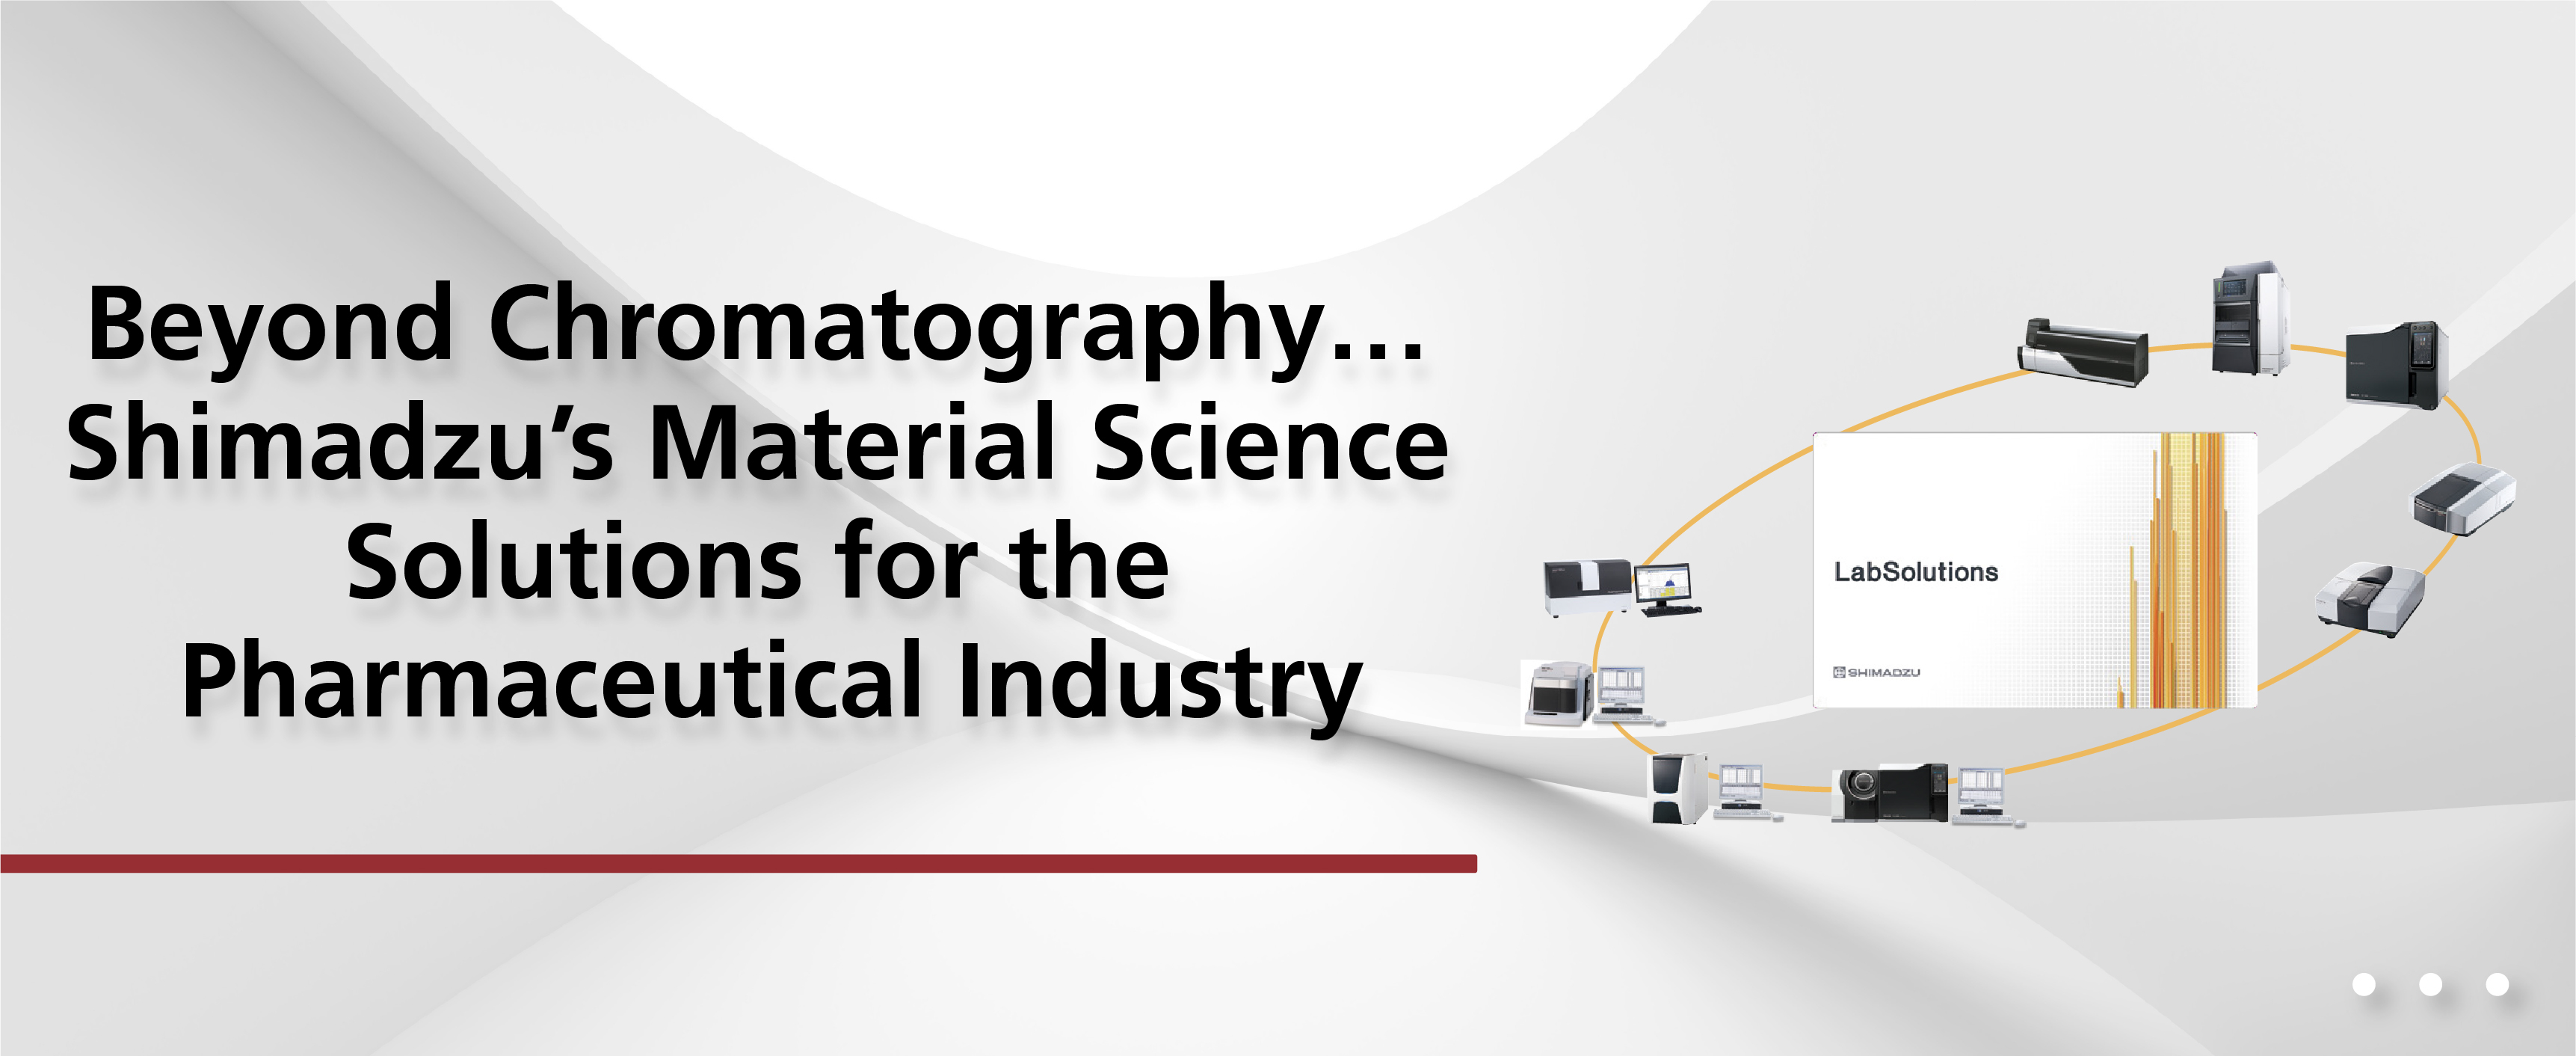 Beyond Chromatography.. Shimadzu's Material Science Solutions for the Pharmaceutical Industry